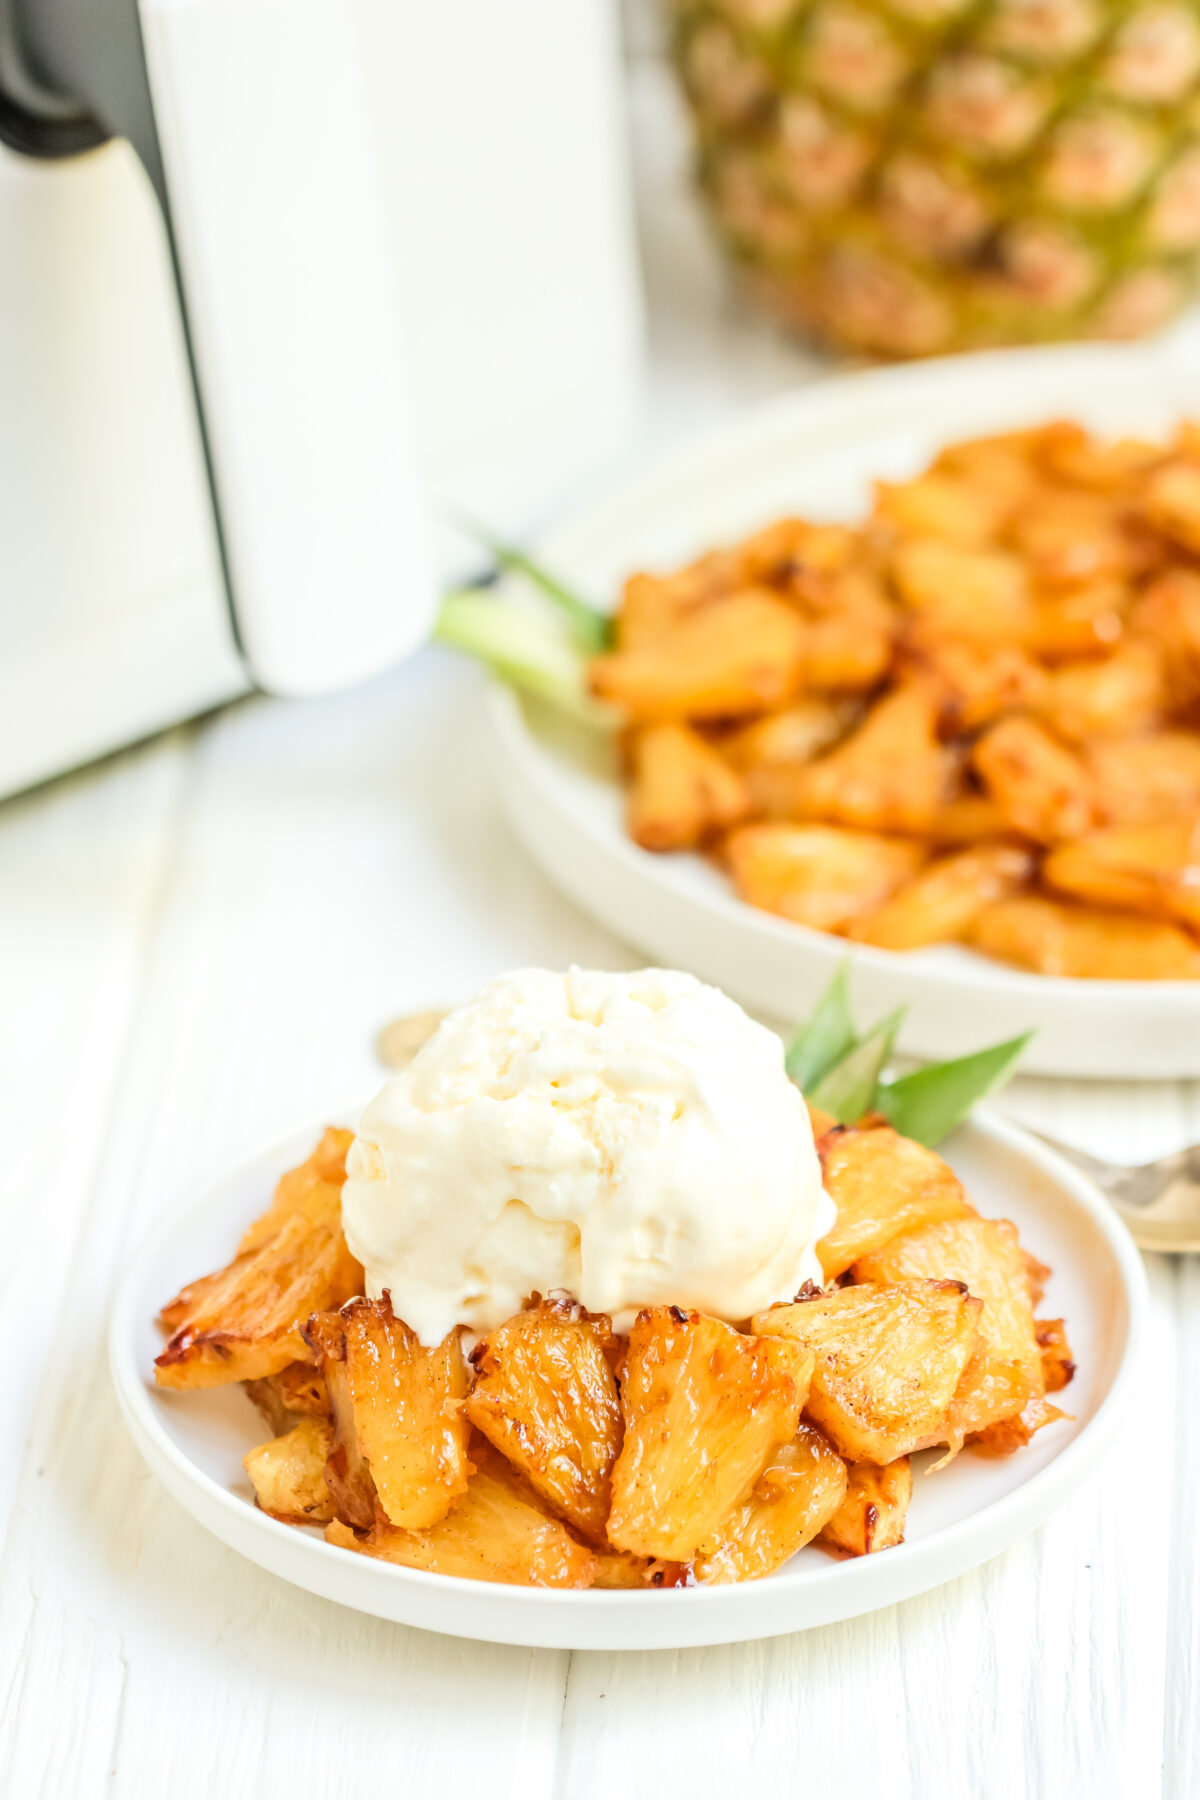 Easy air fryer pineapple recipe. Serve with a scoop of vanilla ice cream for dessert, this pineapple is perfectly caramelized and sweet!